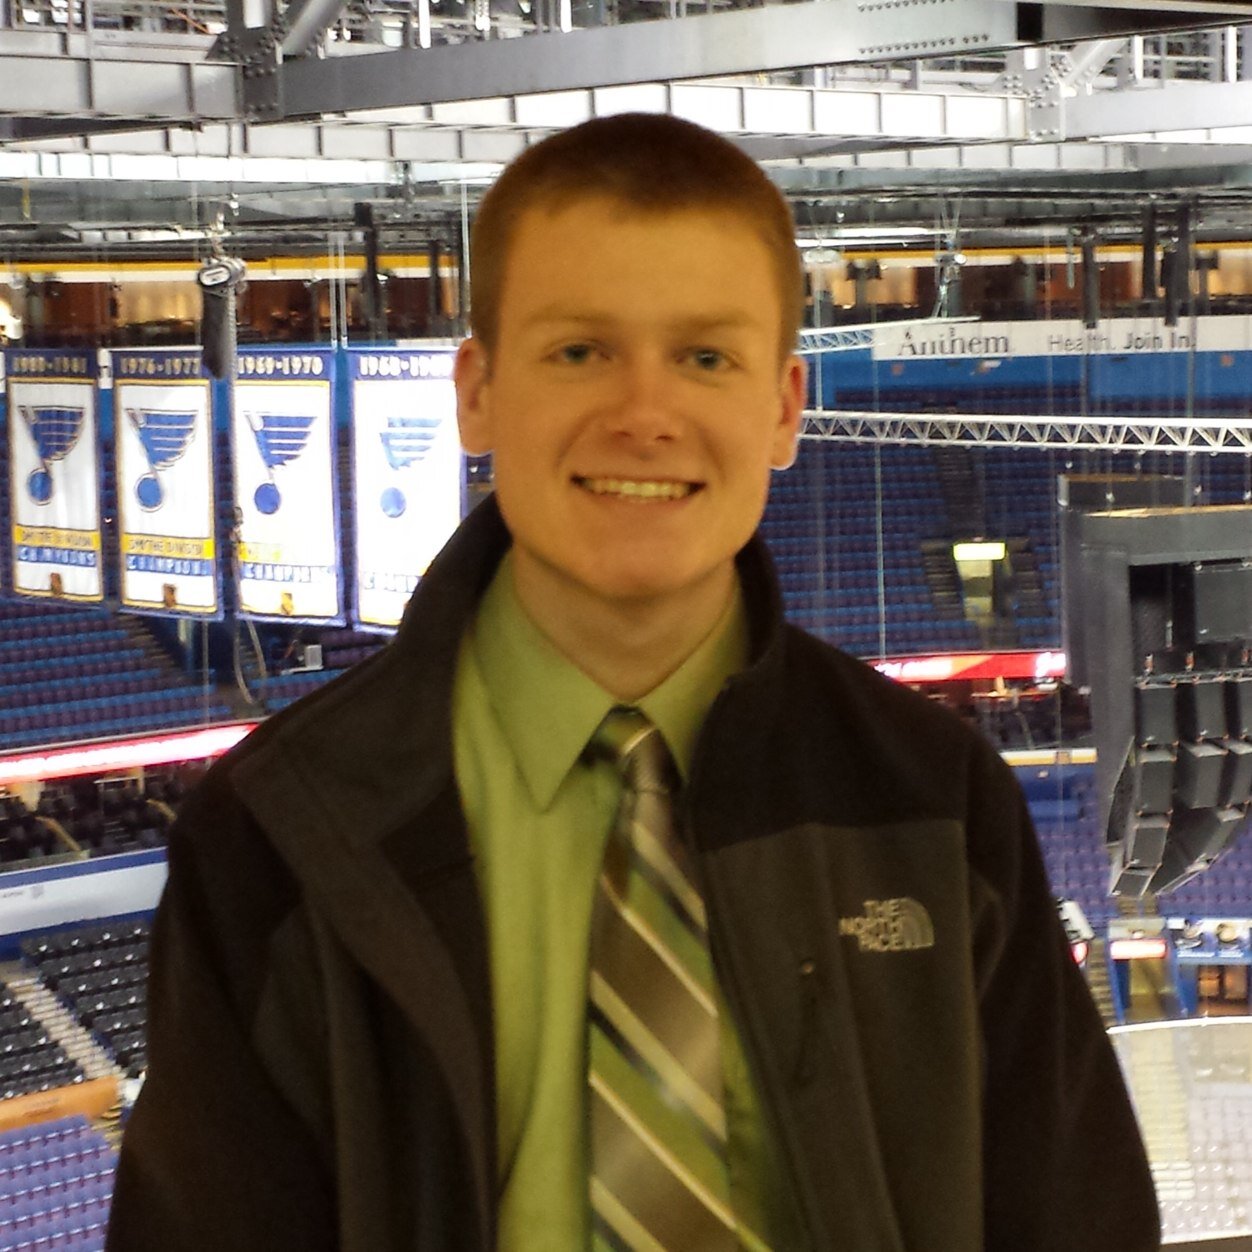 Free agent sports reporter for hire. I spent five seasons as @KMOV's St. Louis Blues beat writer. Contact: drewallsman@yahoo.com